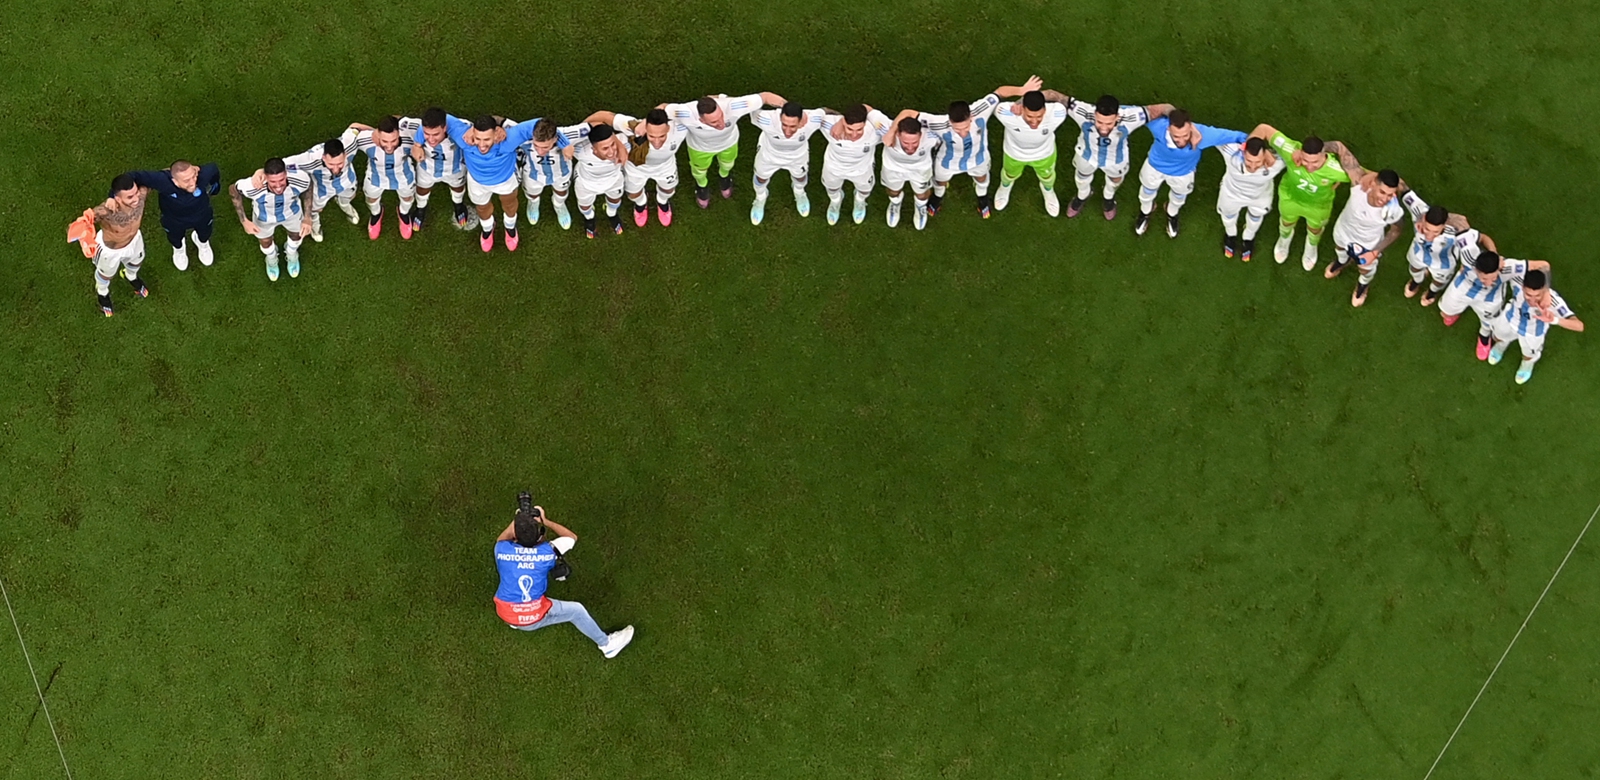 Argentina players pose for a photograph as they celebrate their win after the World Cup semifinal match between Argentina and Croatia at Lusail Stadium in Lusail, Qatar on December 13, 2022. Photo: AFP